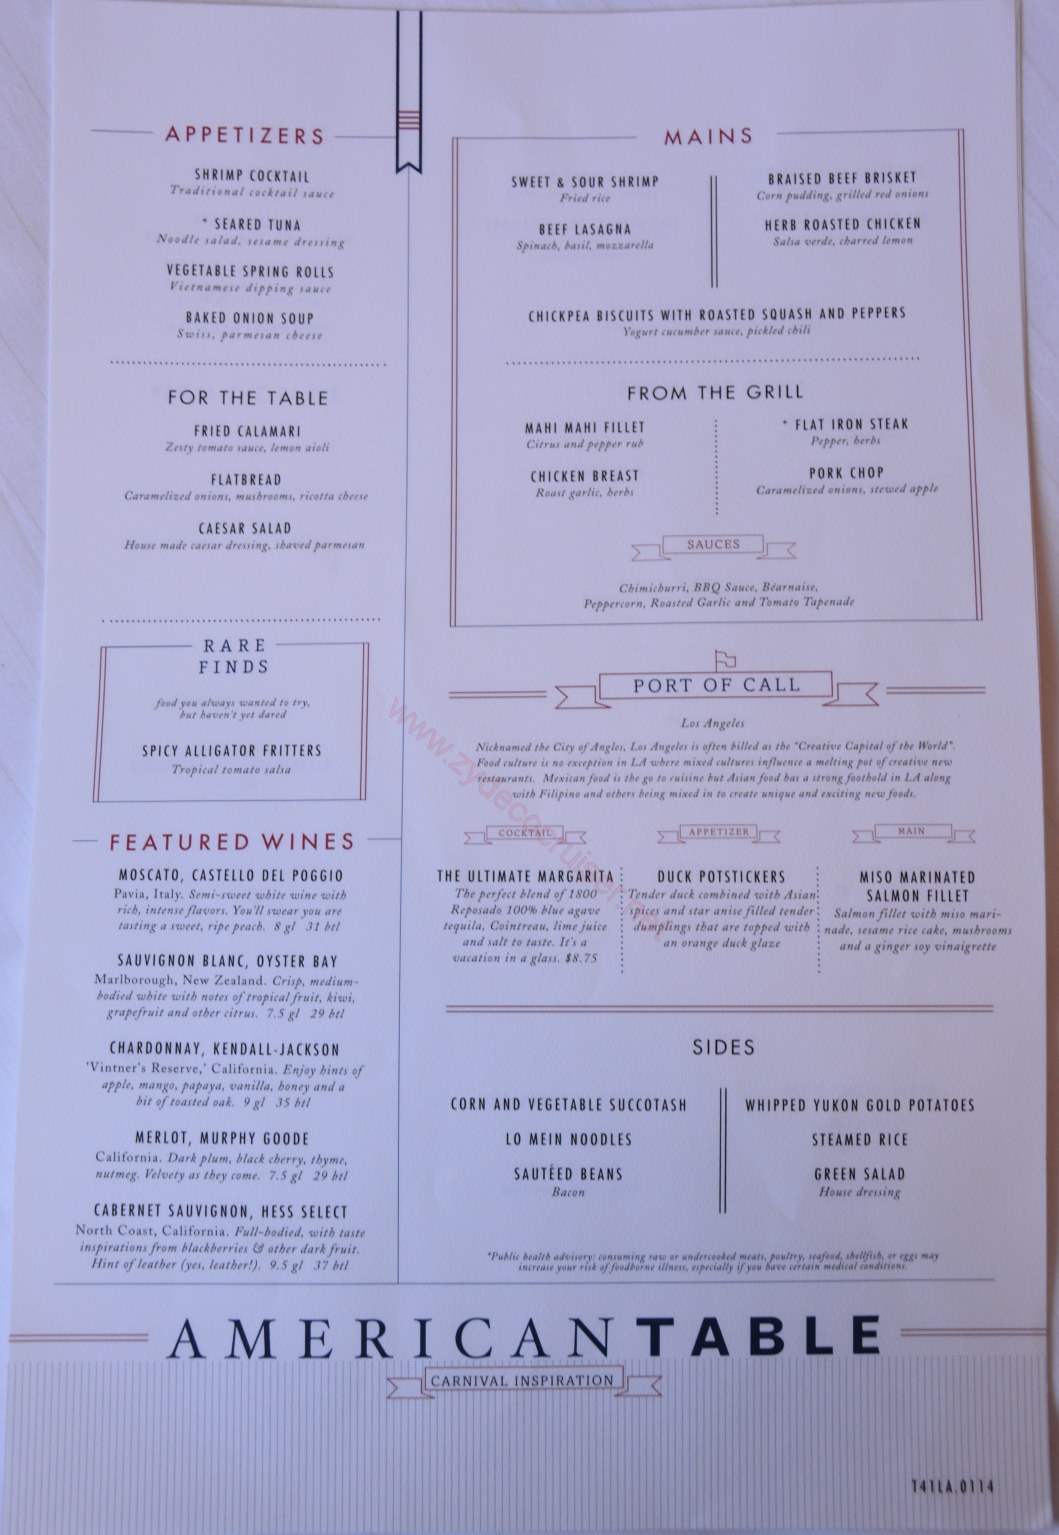 Carnival Inspiration, 3 Day American Table Menus, Day 1, Los Angeles